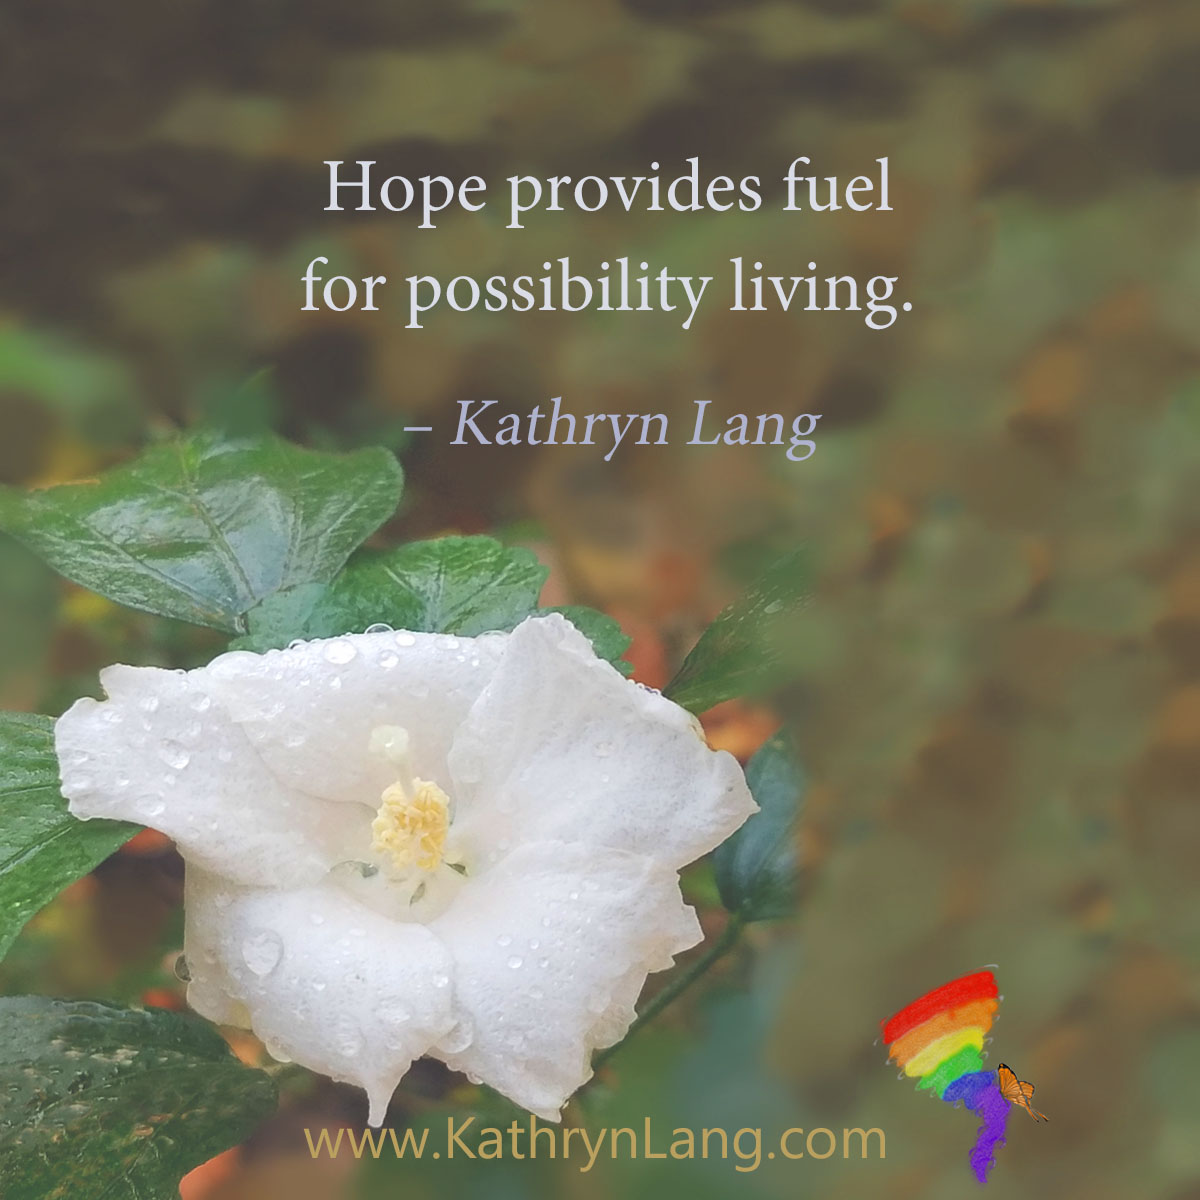 #QuoteoftheDay

Hope provides fuel for possibility living